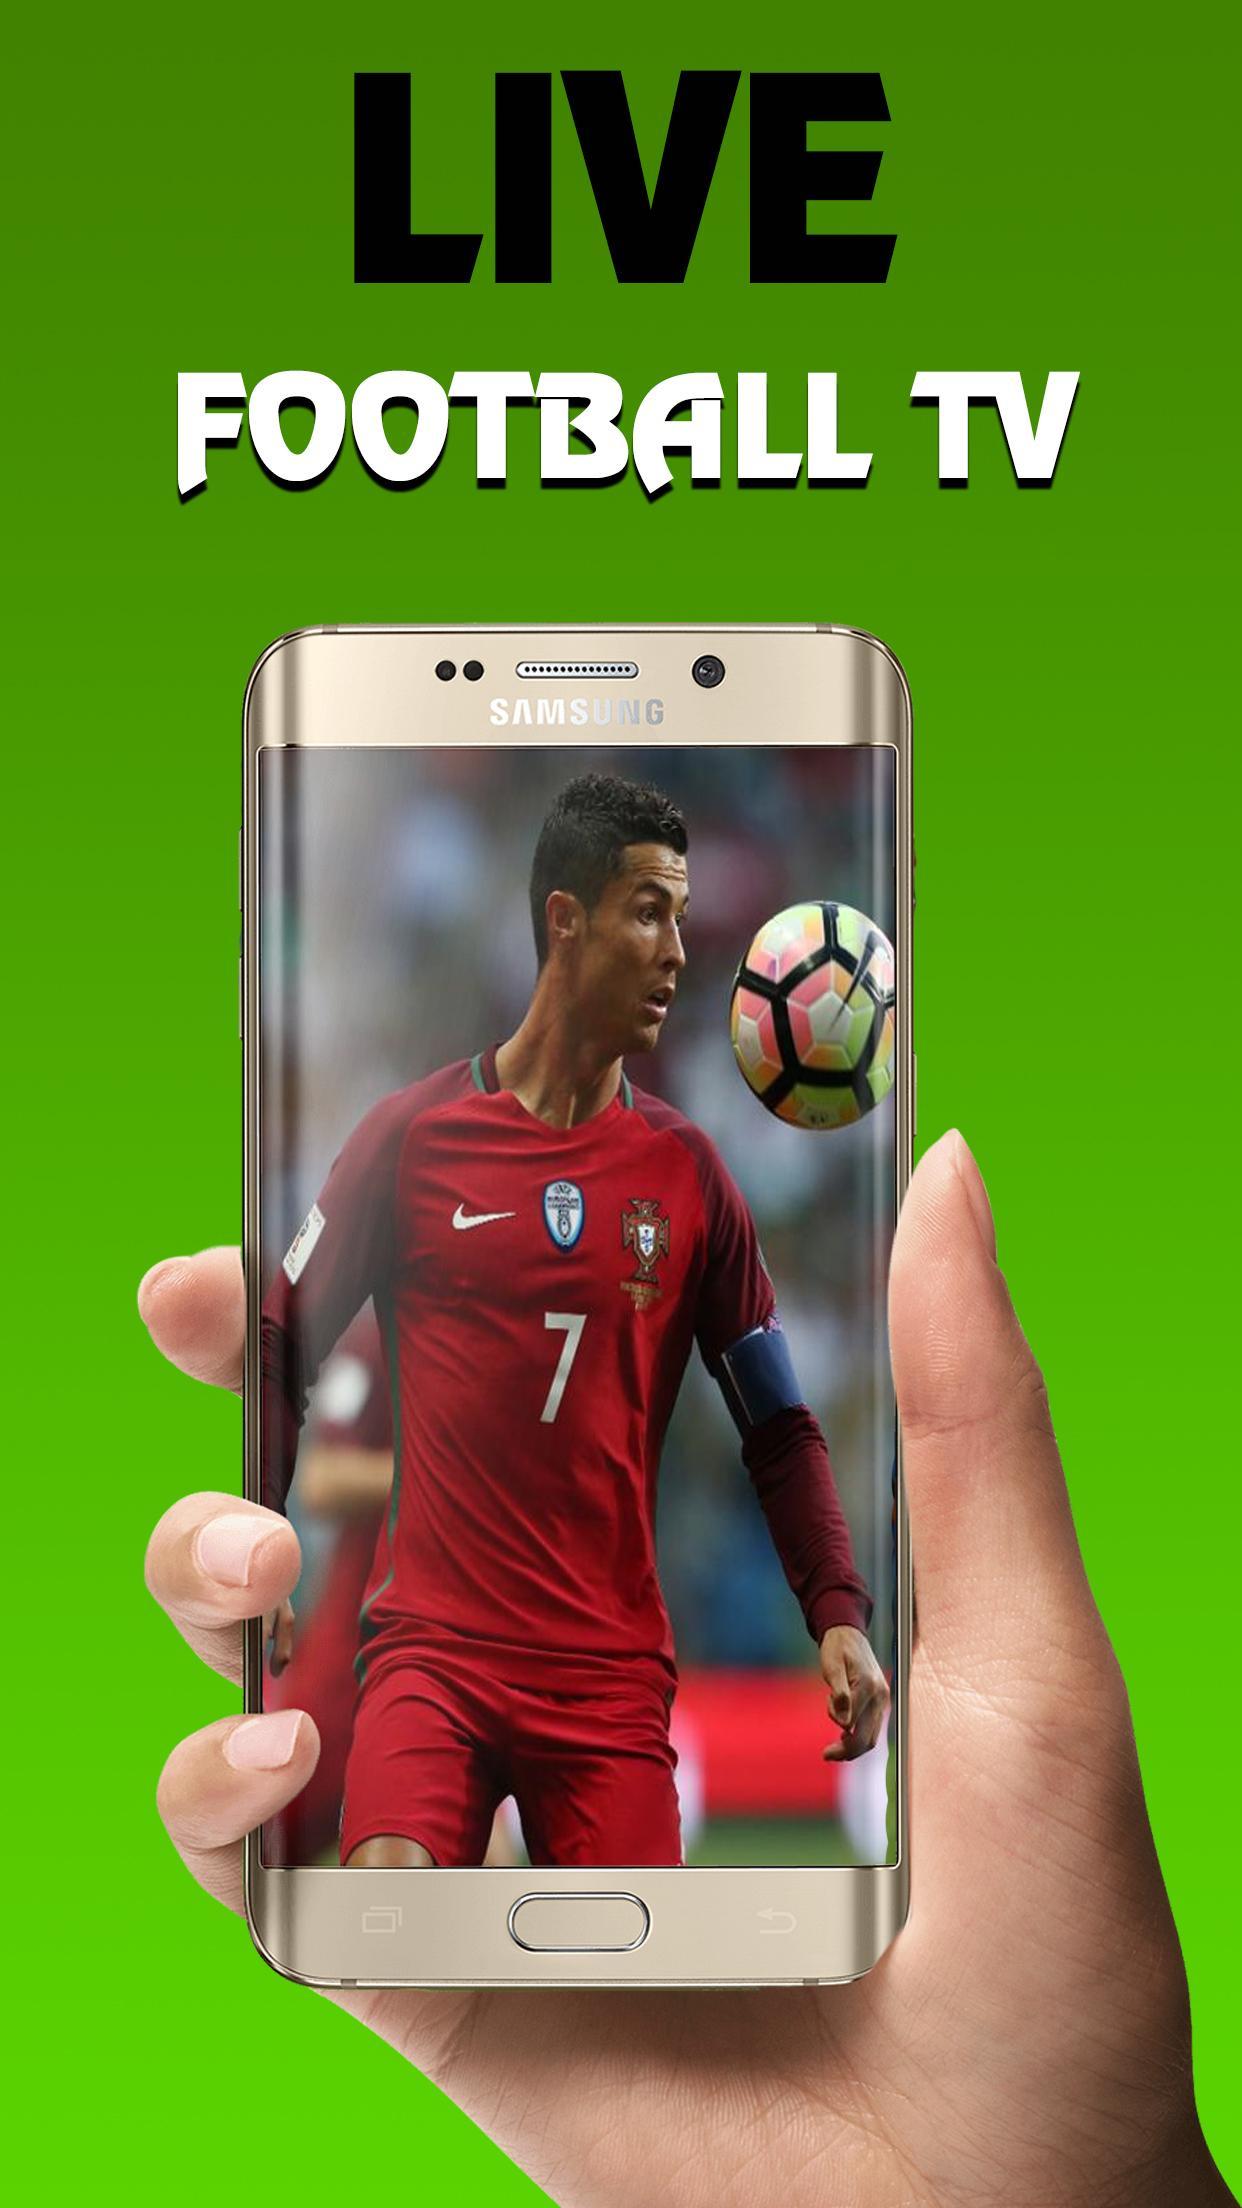 Live Football Plus TV for Android - APK Download